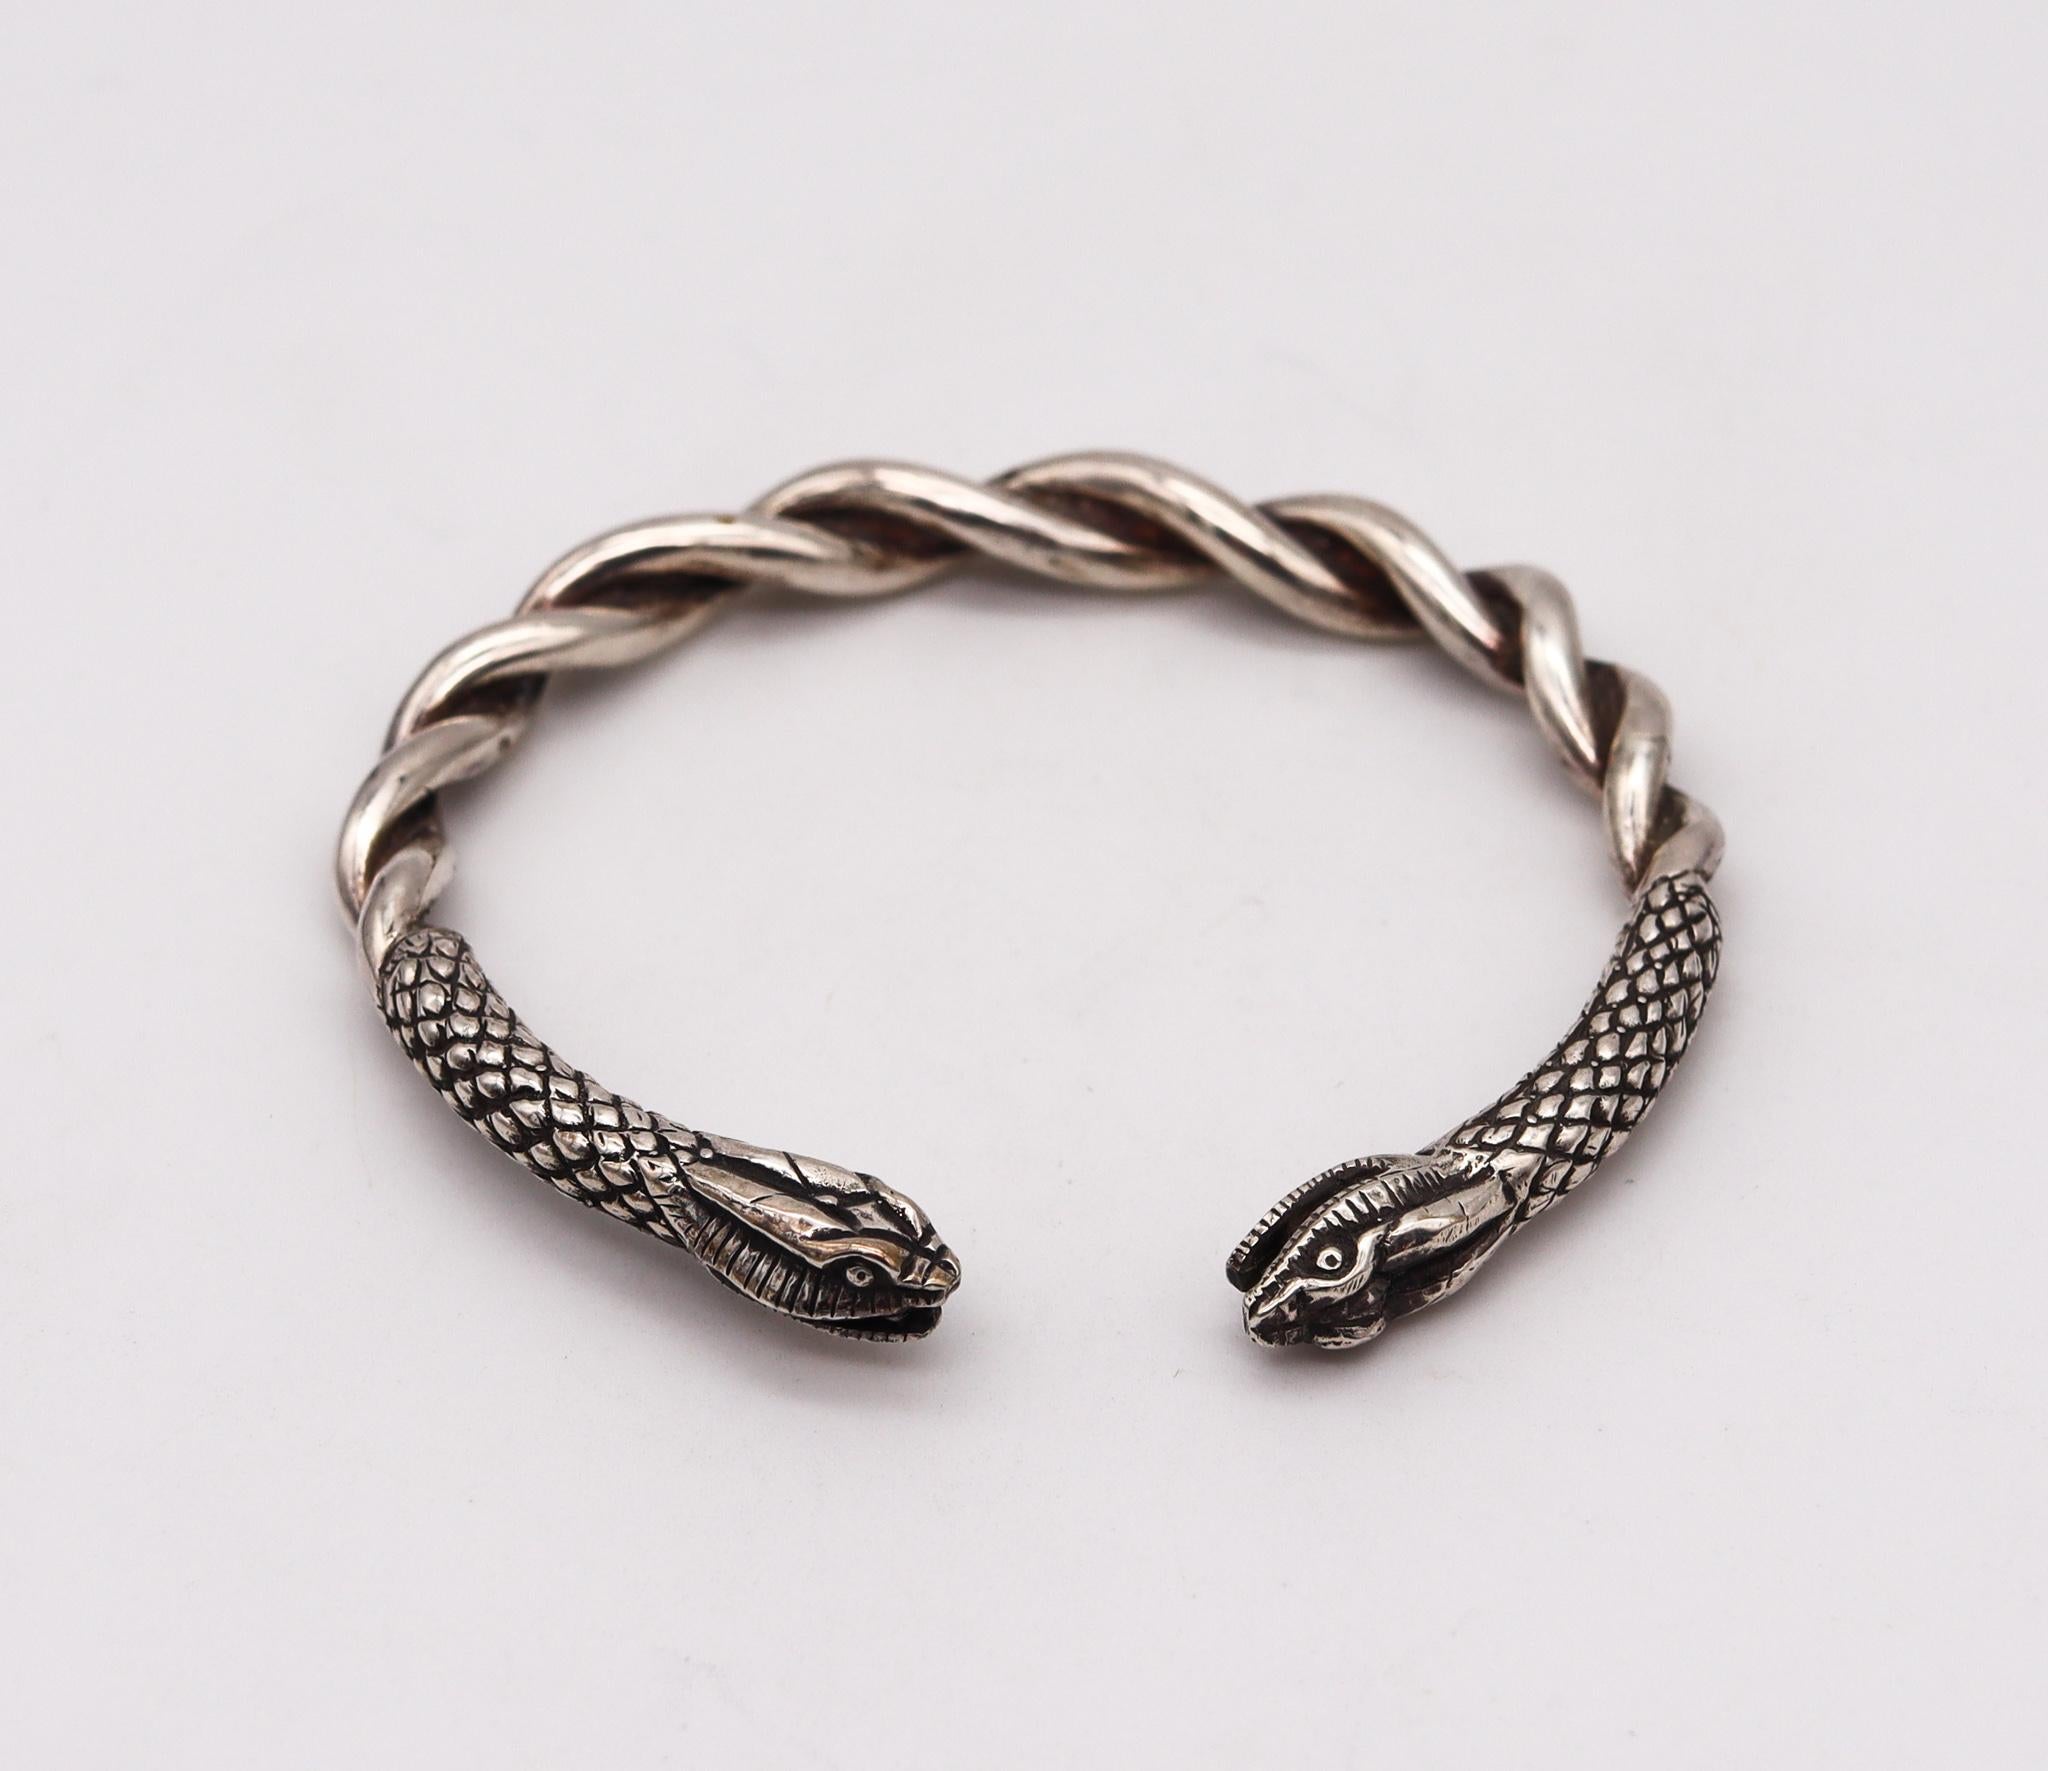 French Etruscan revival cuff.

Beautiful cuff bracelet, made in Paris France, circa 1970's. It was crafted in the Etruscan revival style with twisted and braided wires in solid  .925/.999 sterling silver with high polished finish. Featuring a pair